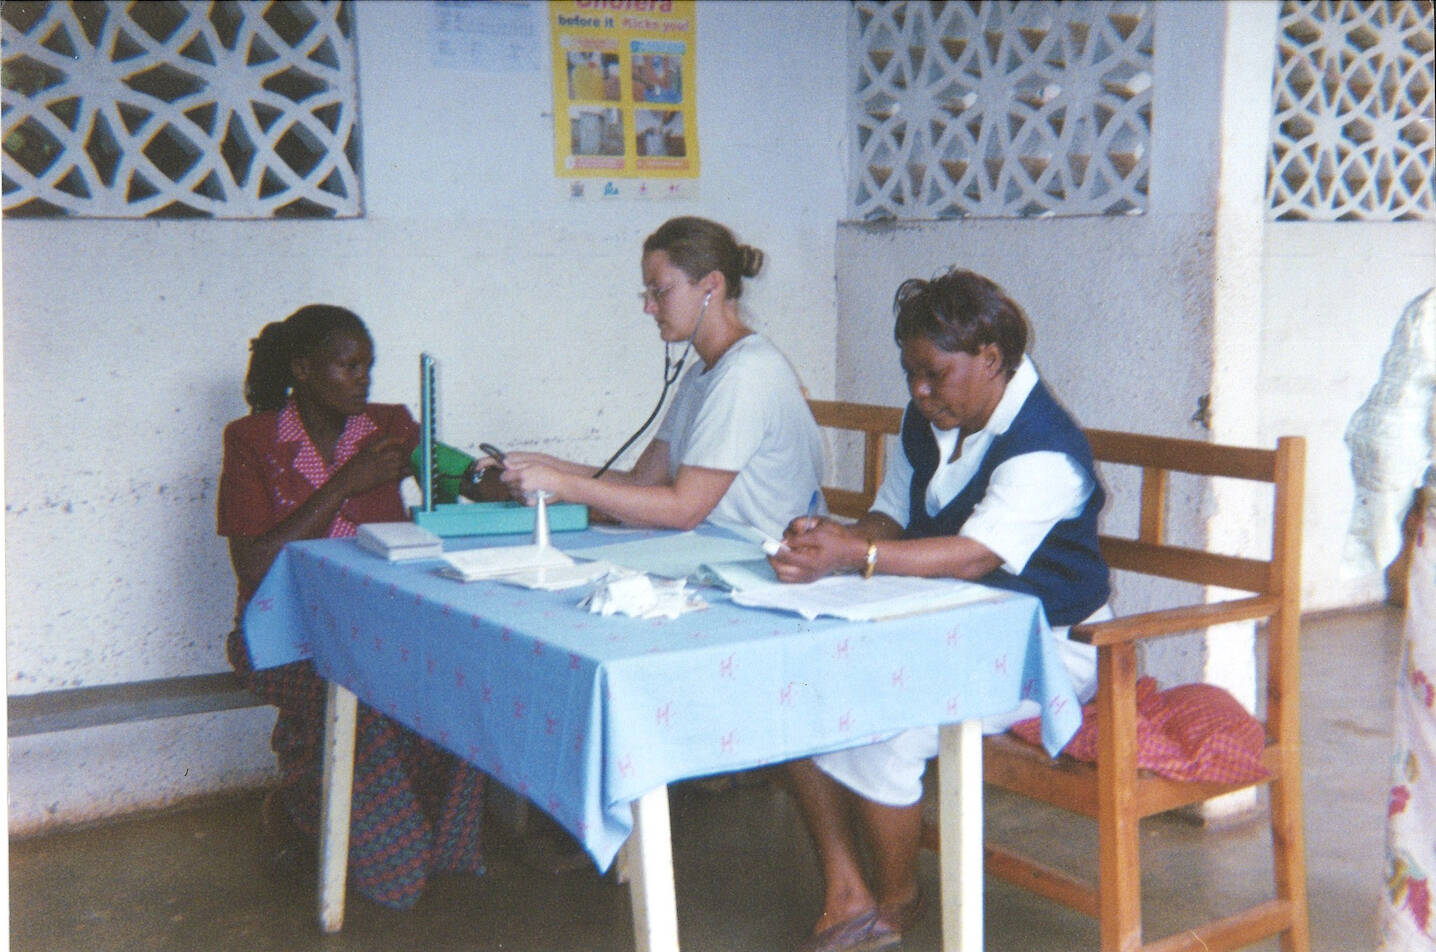 Photo provided
Christine Herbert, center, works in a pre-natal clinic in Zambia while volunteering for the Peace Corps.